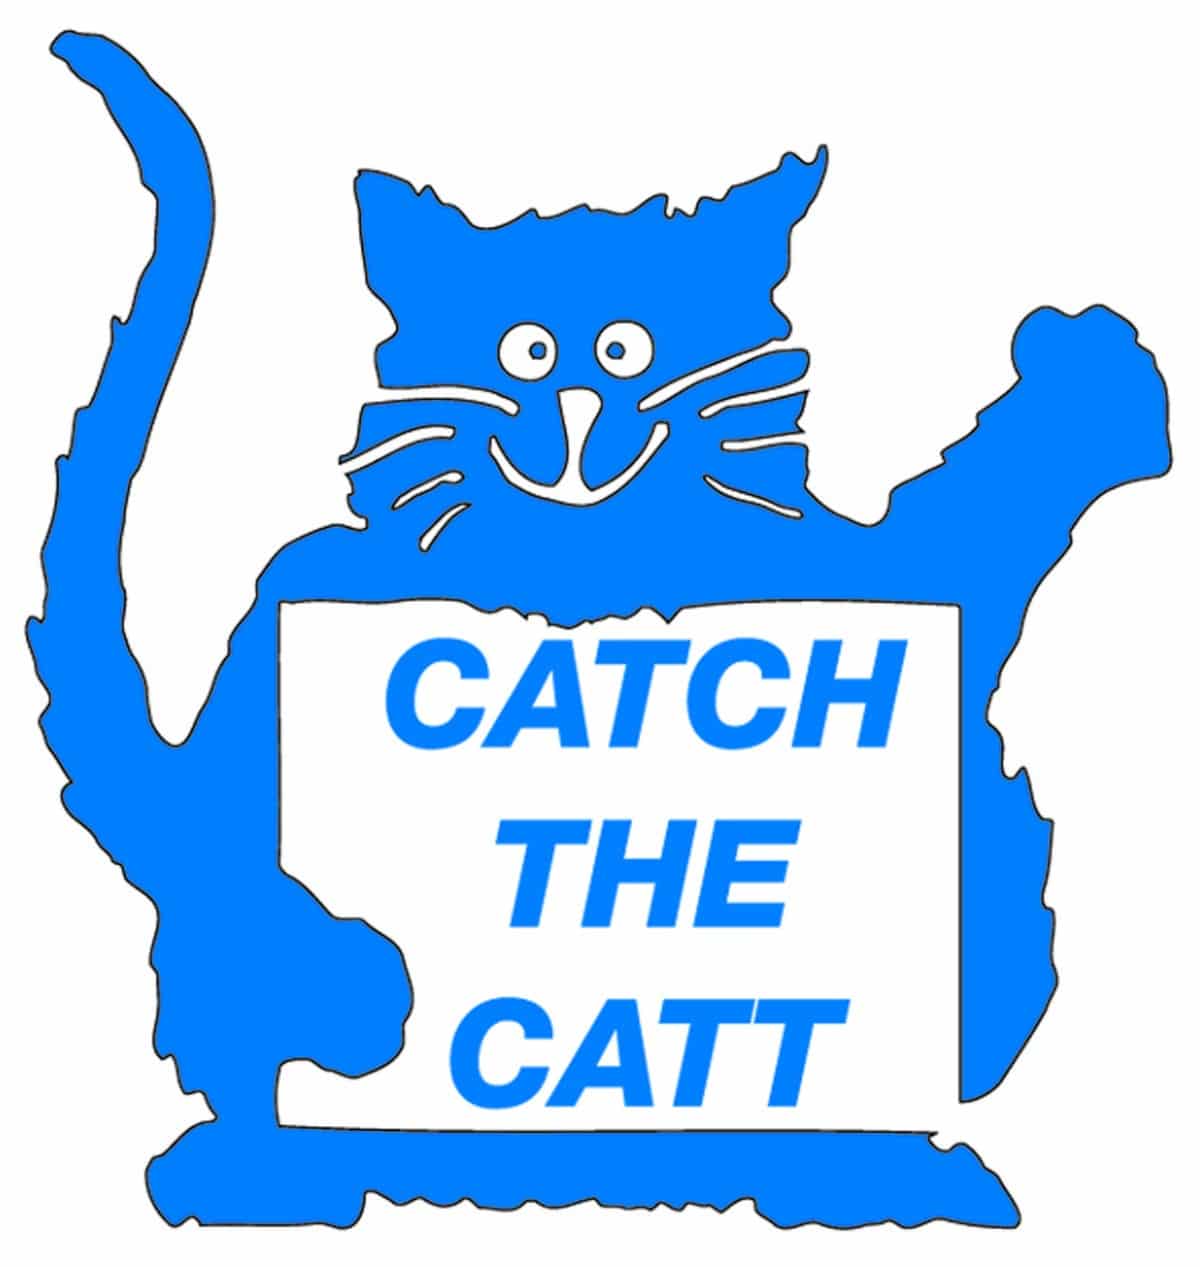 A blue cat holding a sign that reads Catch the CATT.